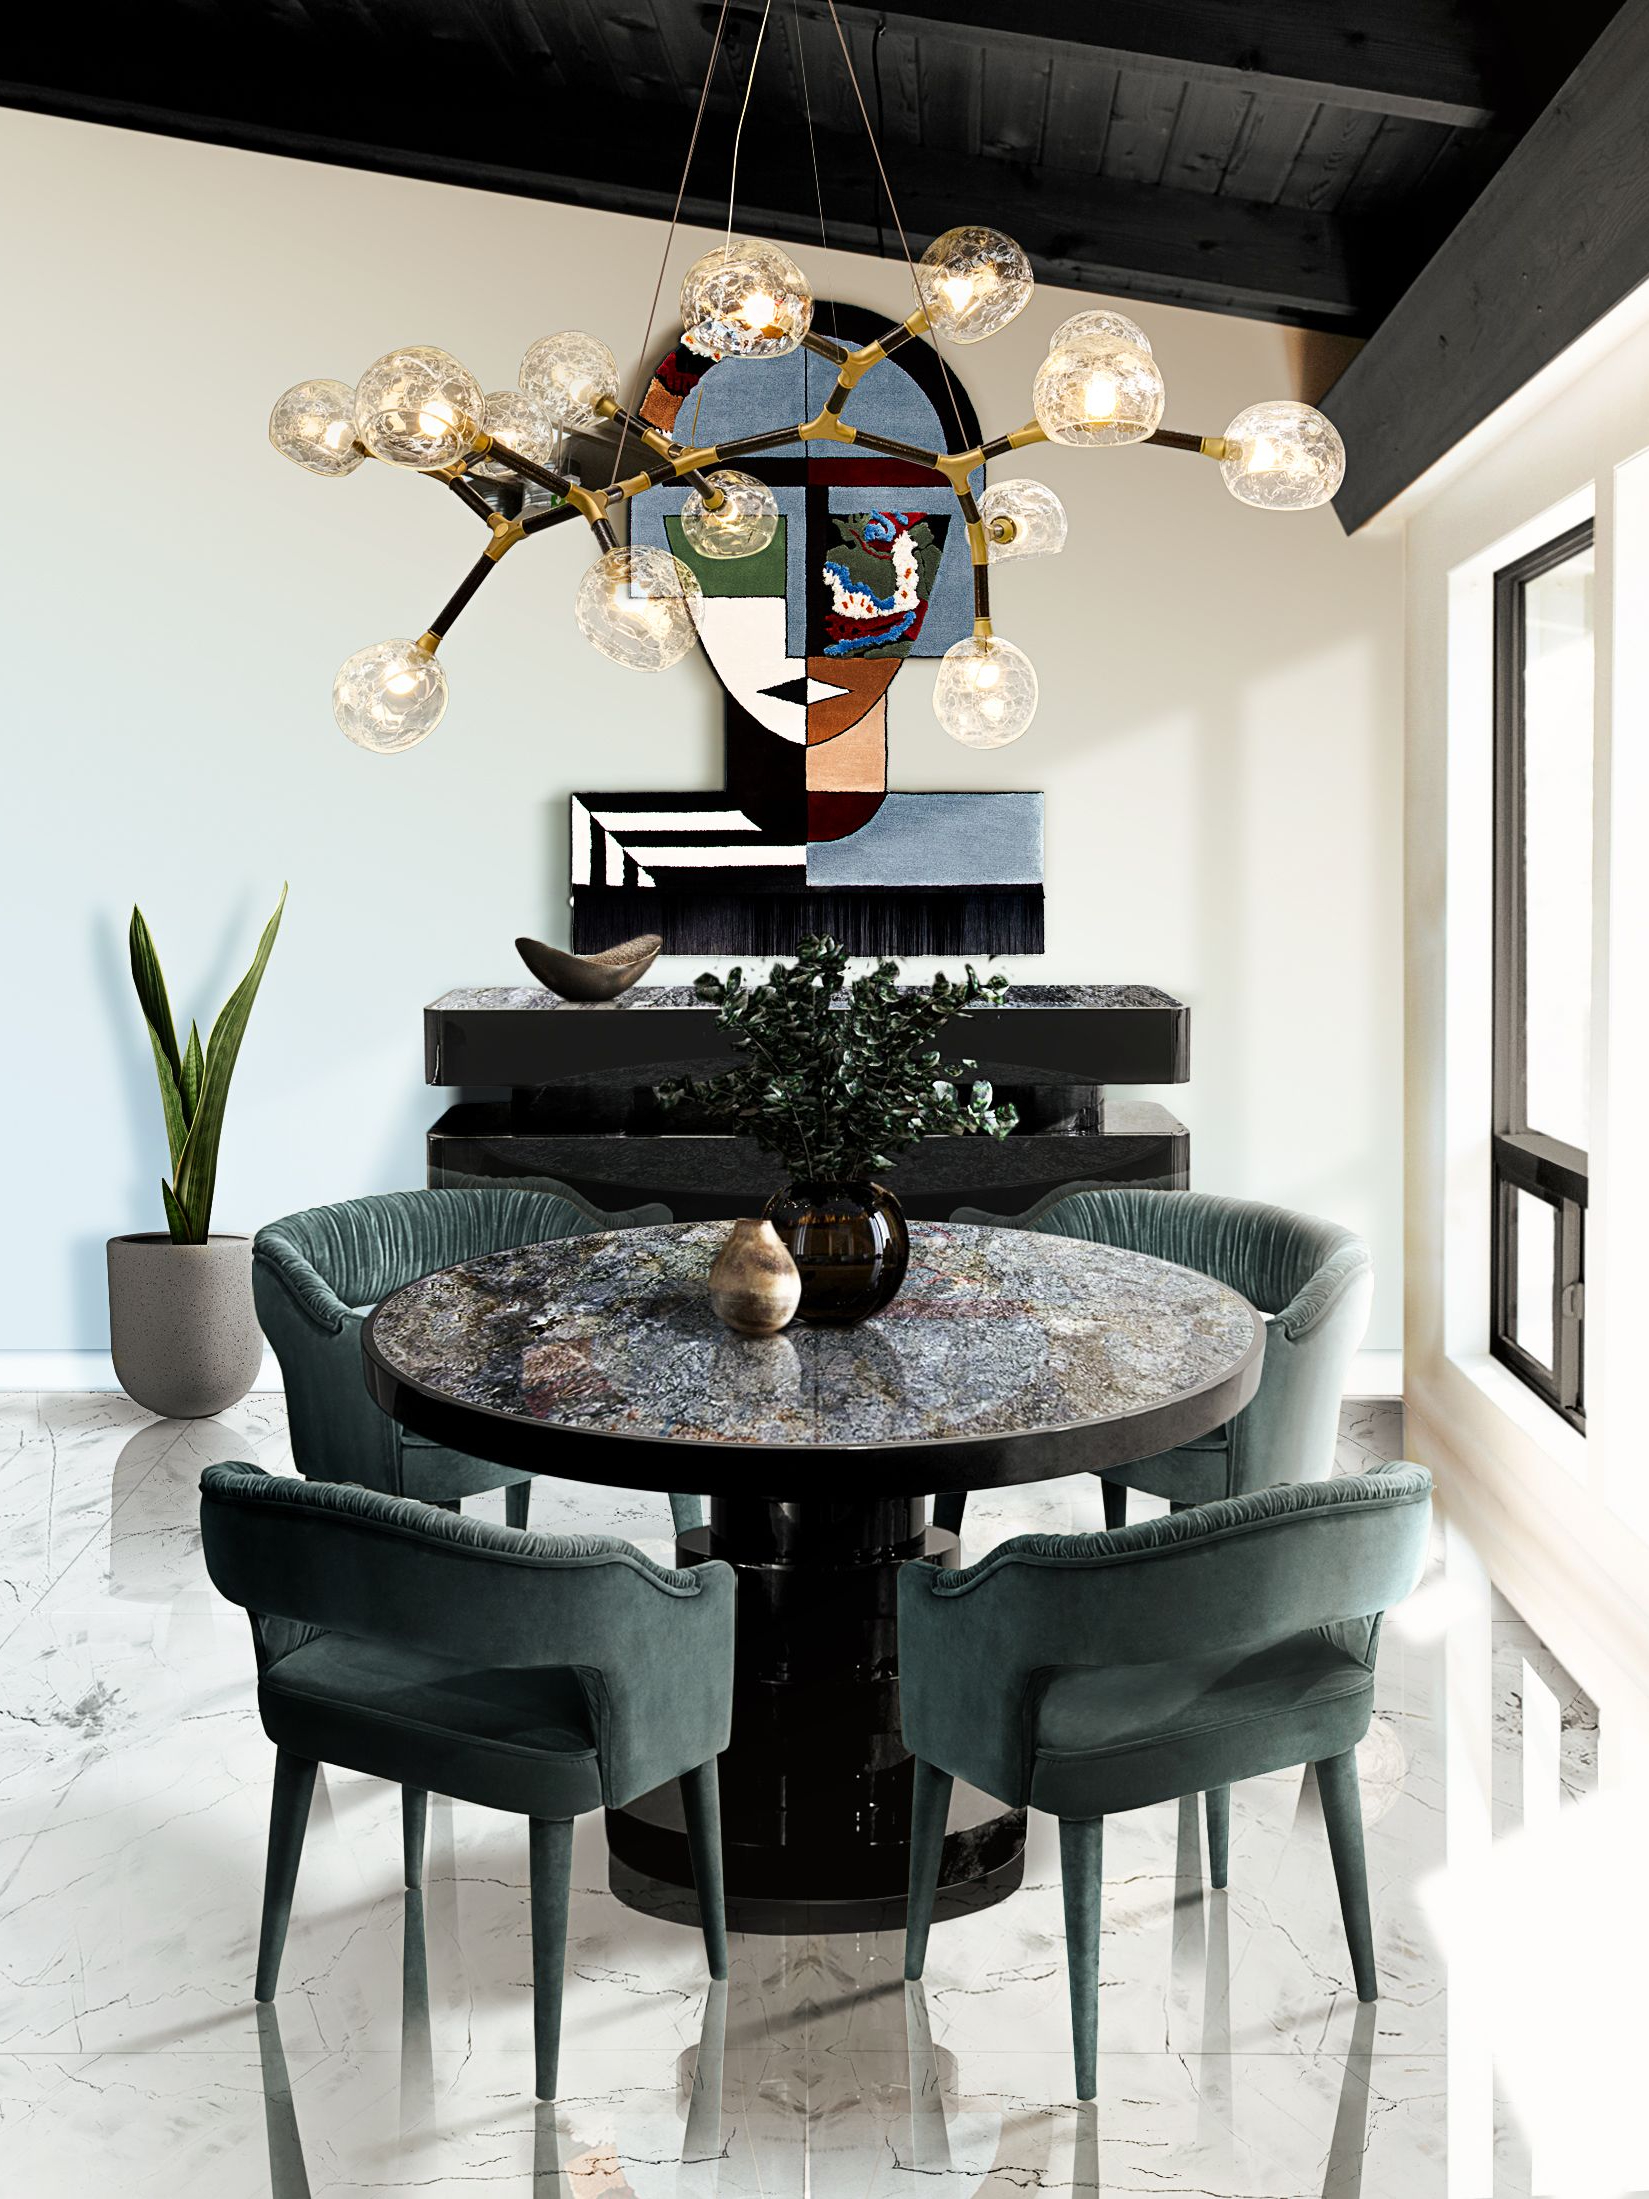 Elegant Dining Room Design That May Provide A More Dynamic Space - Home'Society